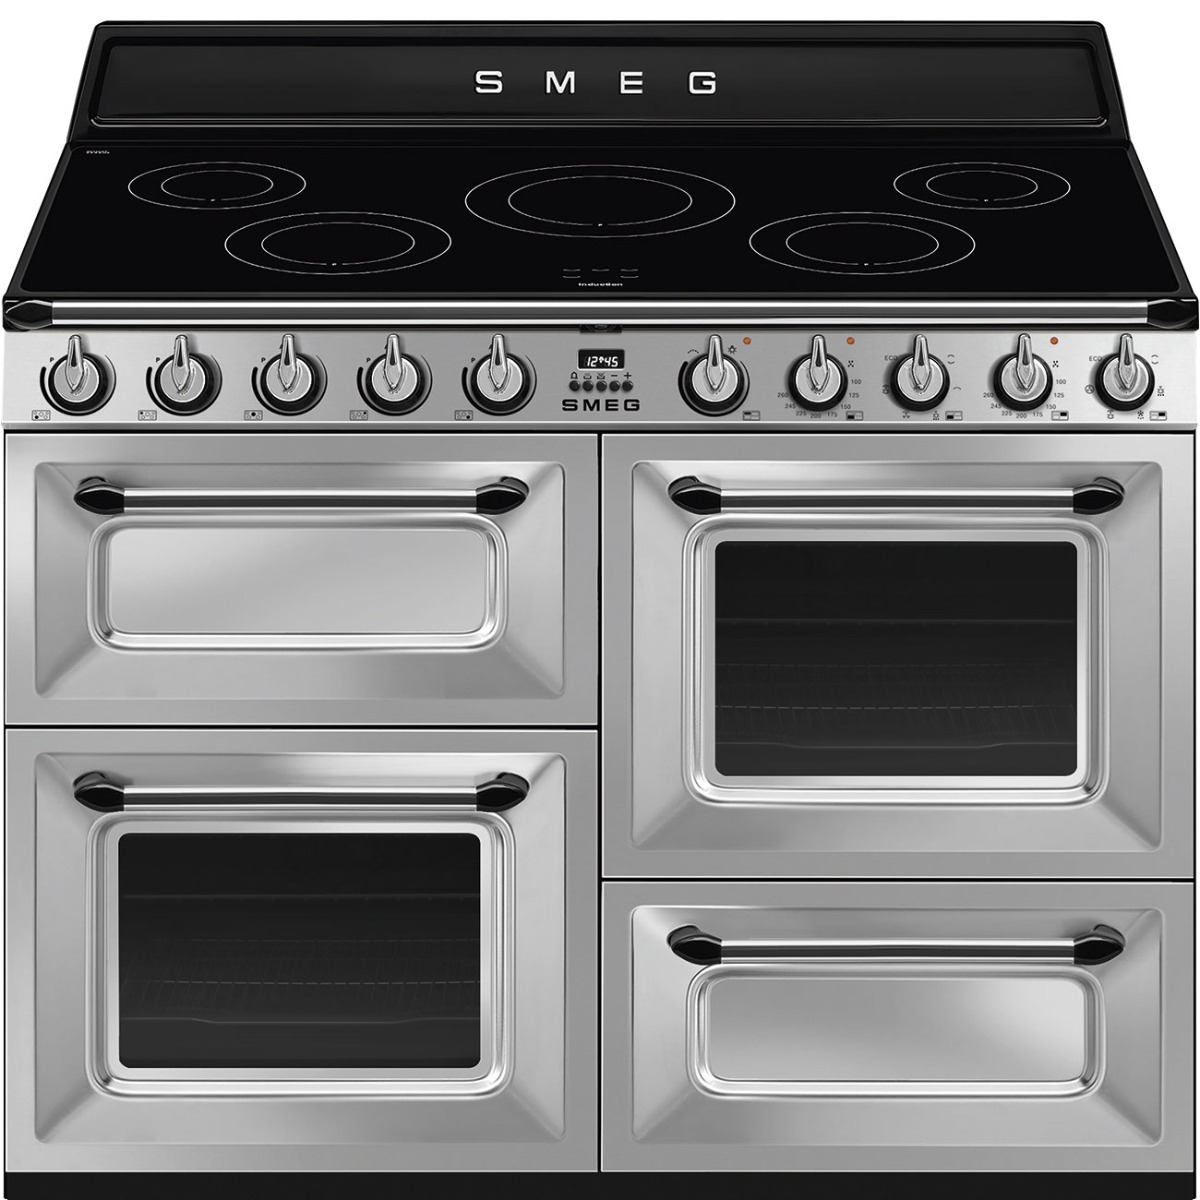 *Special Offer* Smeg TR4110IX-1 110cm Victoria Range Cooker with Induction Hob - Stainless Steel